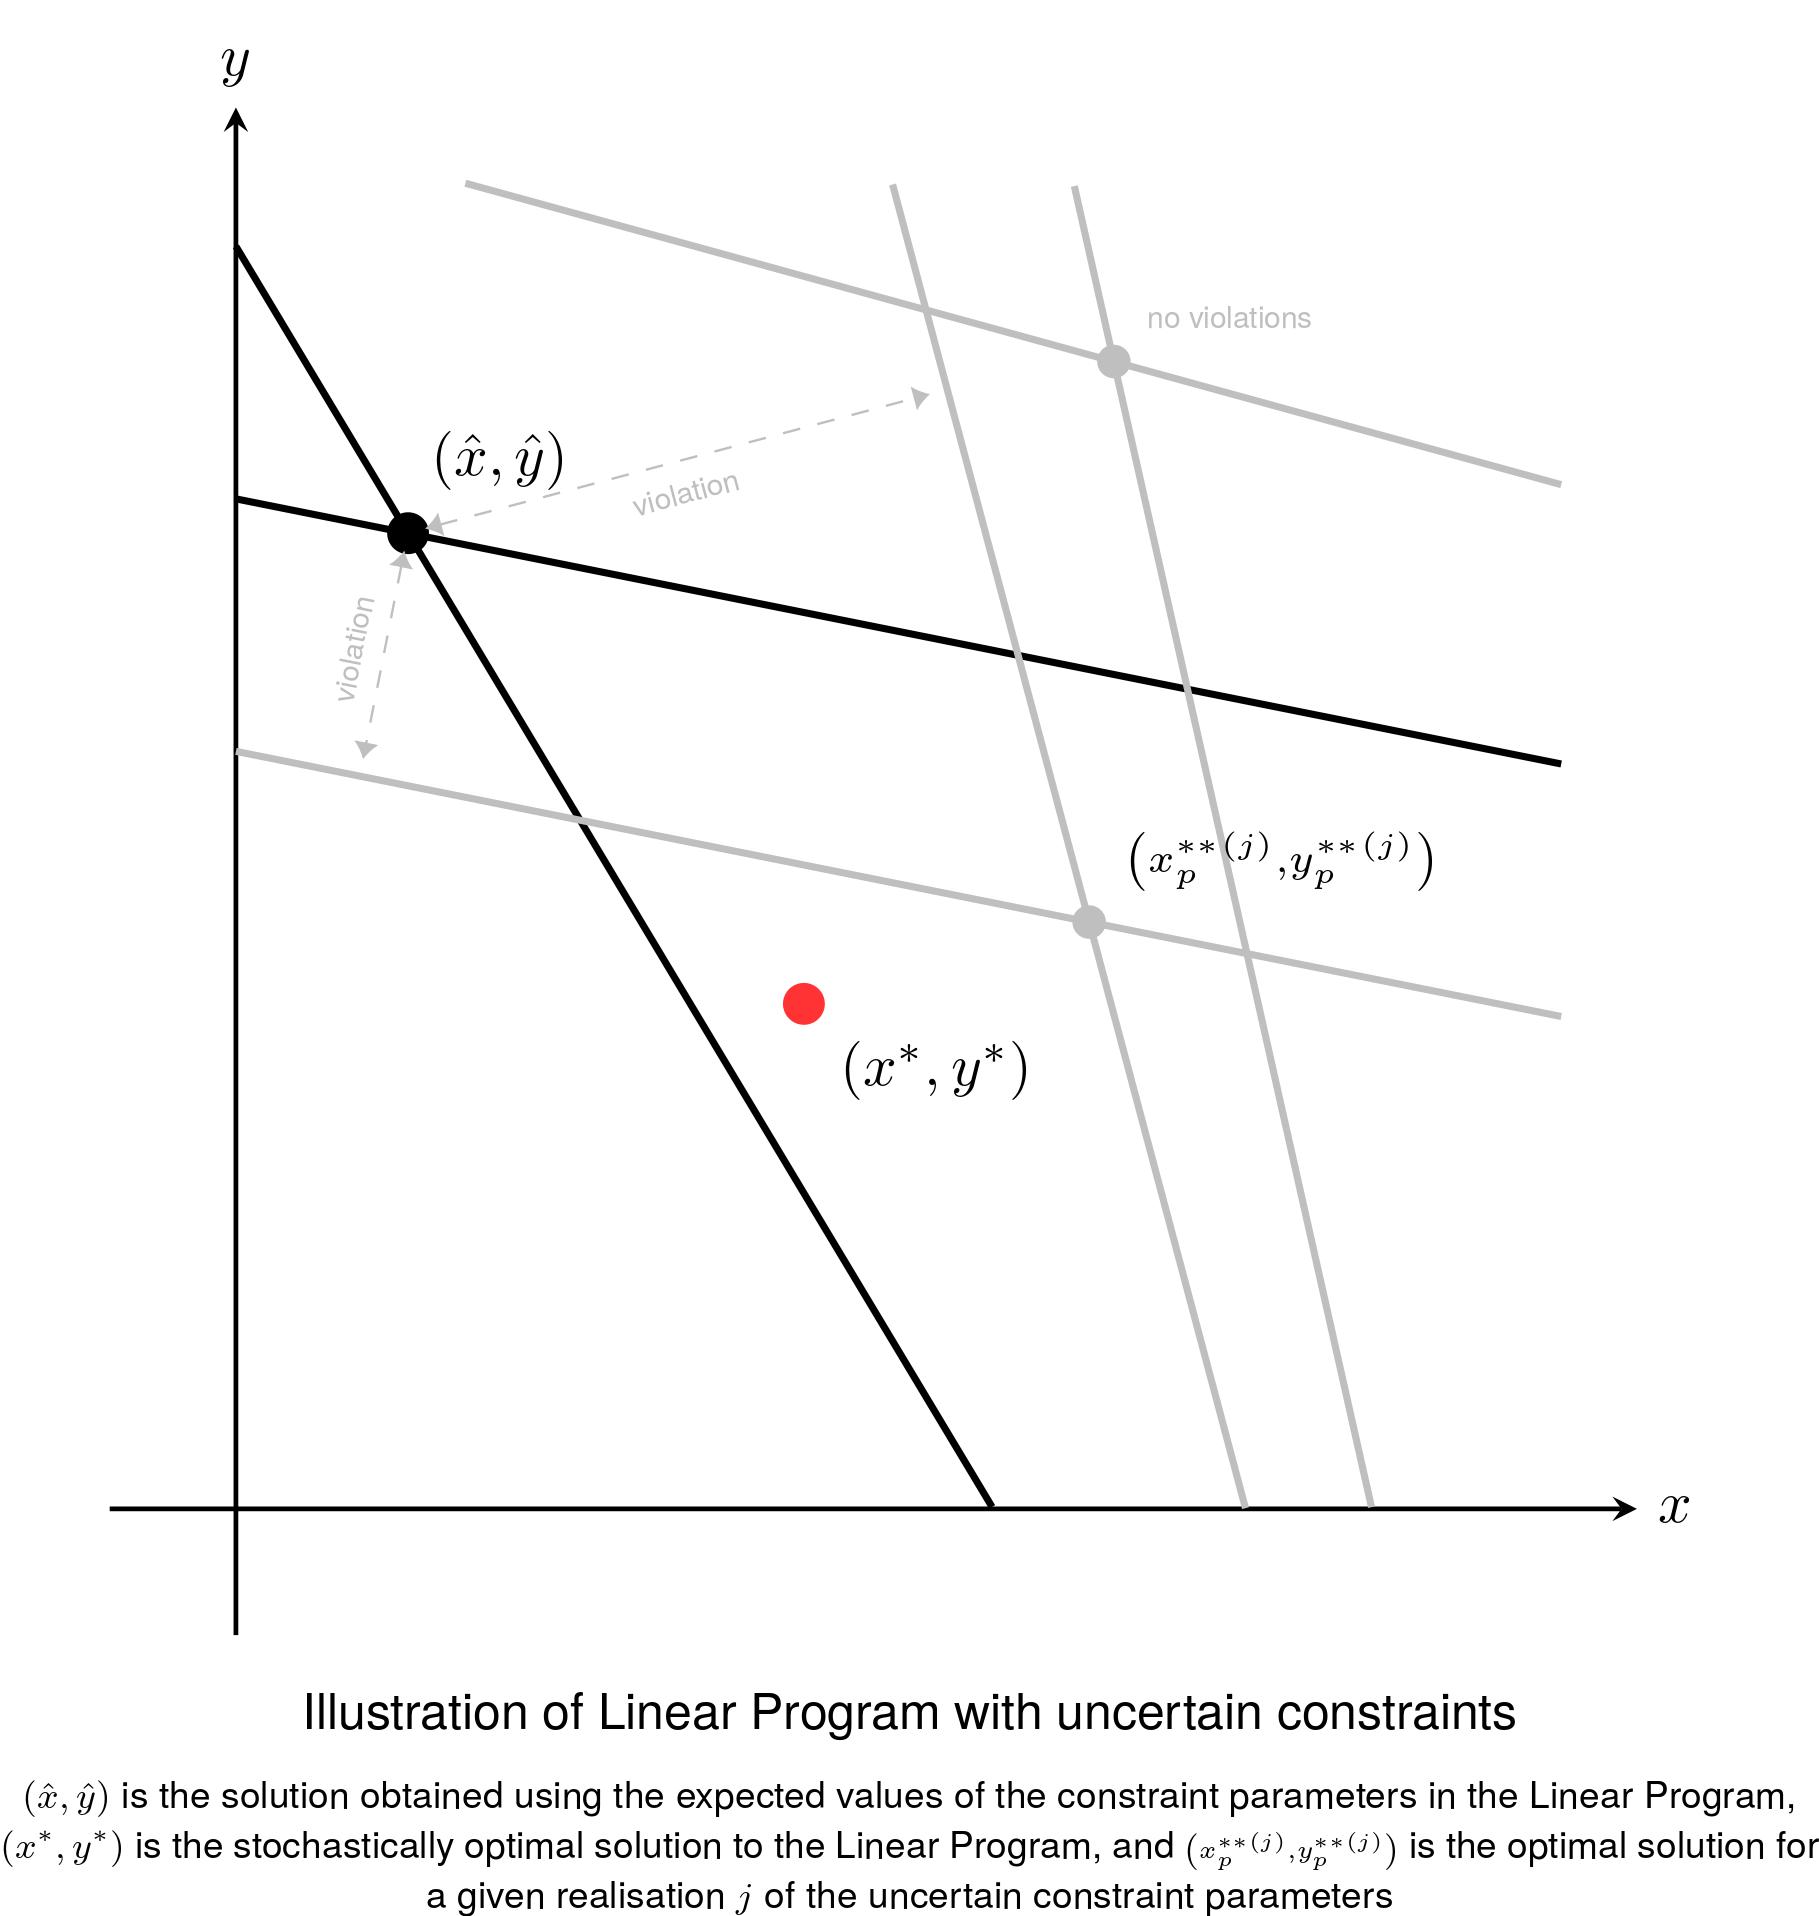 Illustration of Linear Program with uncertain constraints